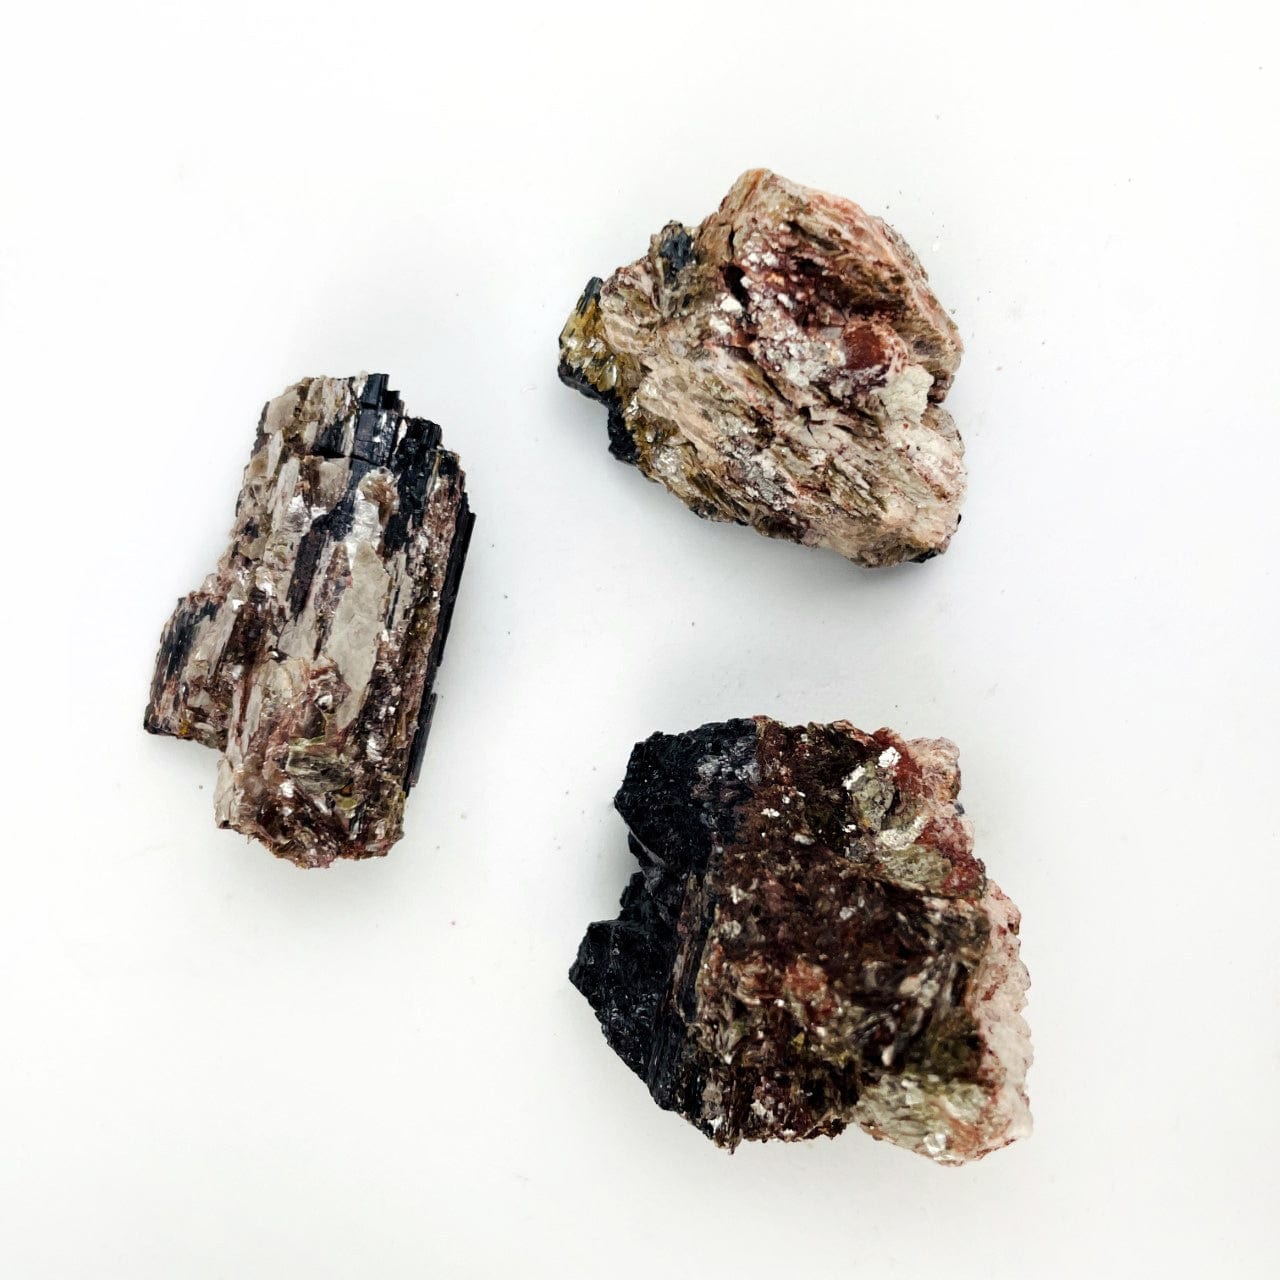 3 pieces of Tourmaline With Mica